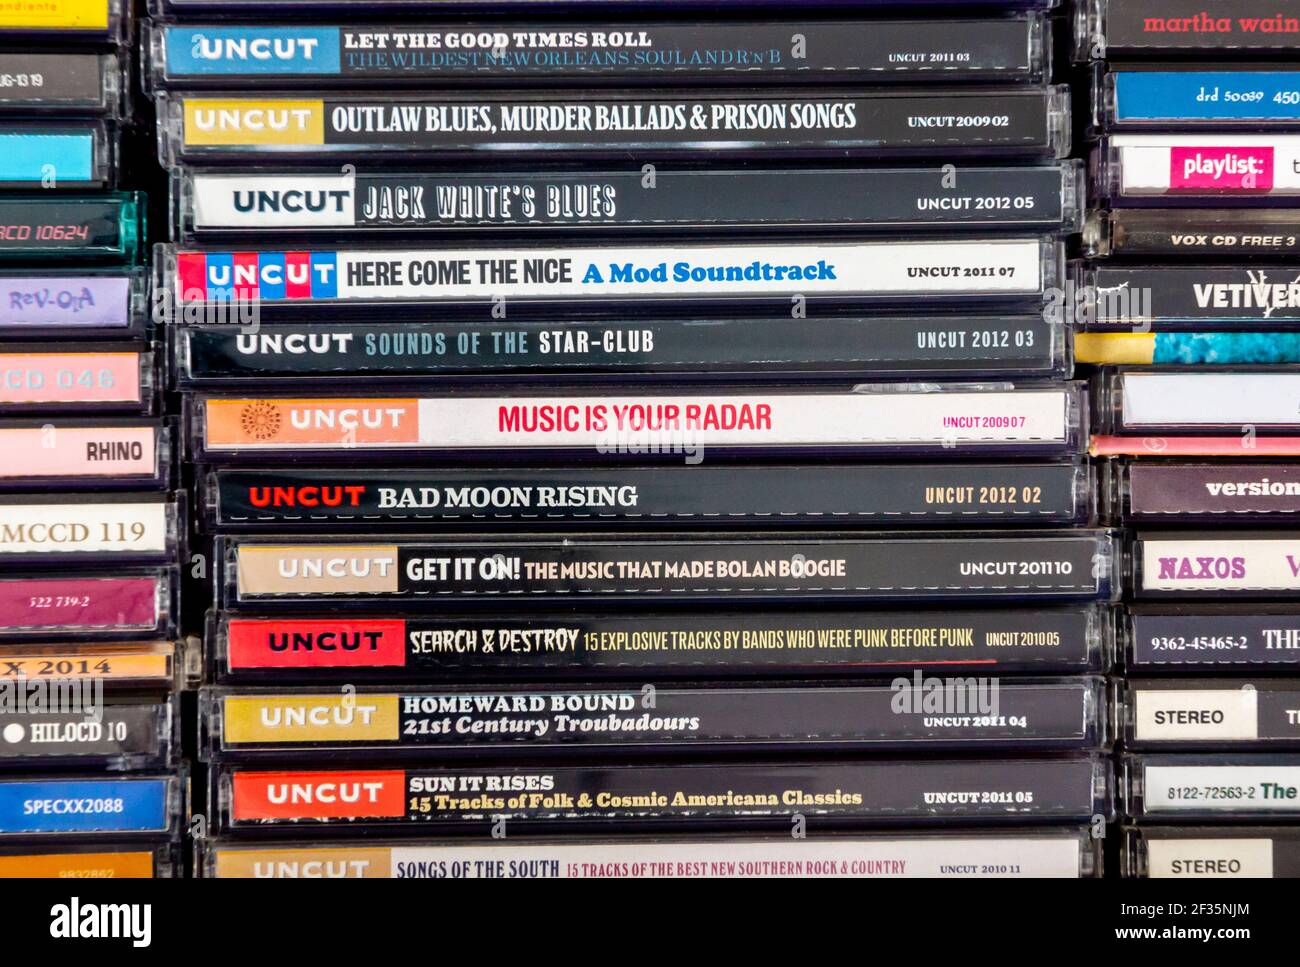 Collection of cds from Uncut a British music magazine that covers heritage rock music with a free cover mounted CD that is given away with each copy. Stock Photo